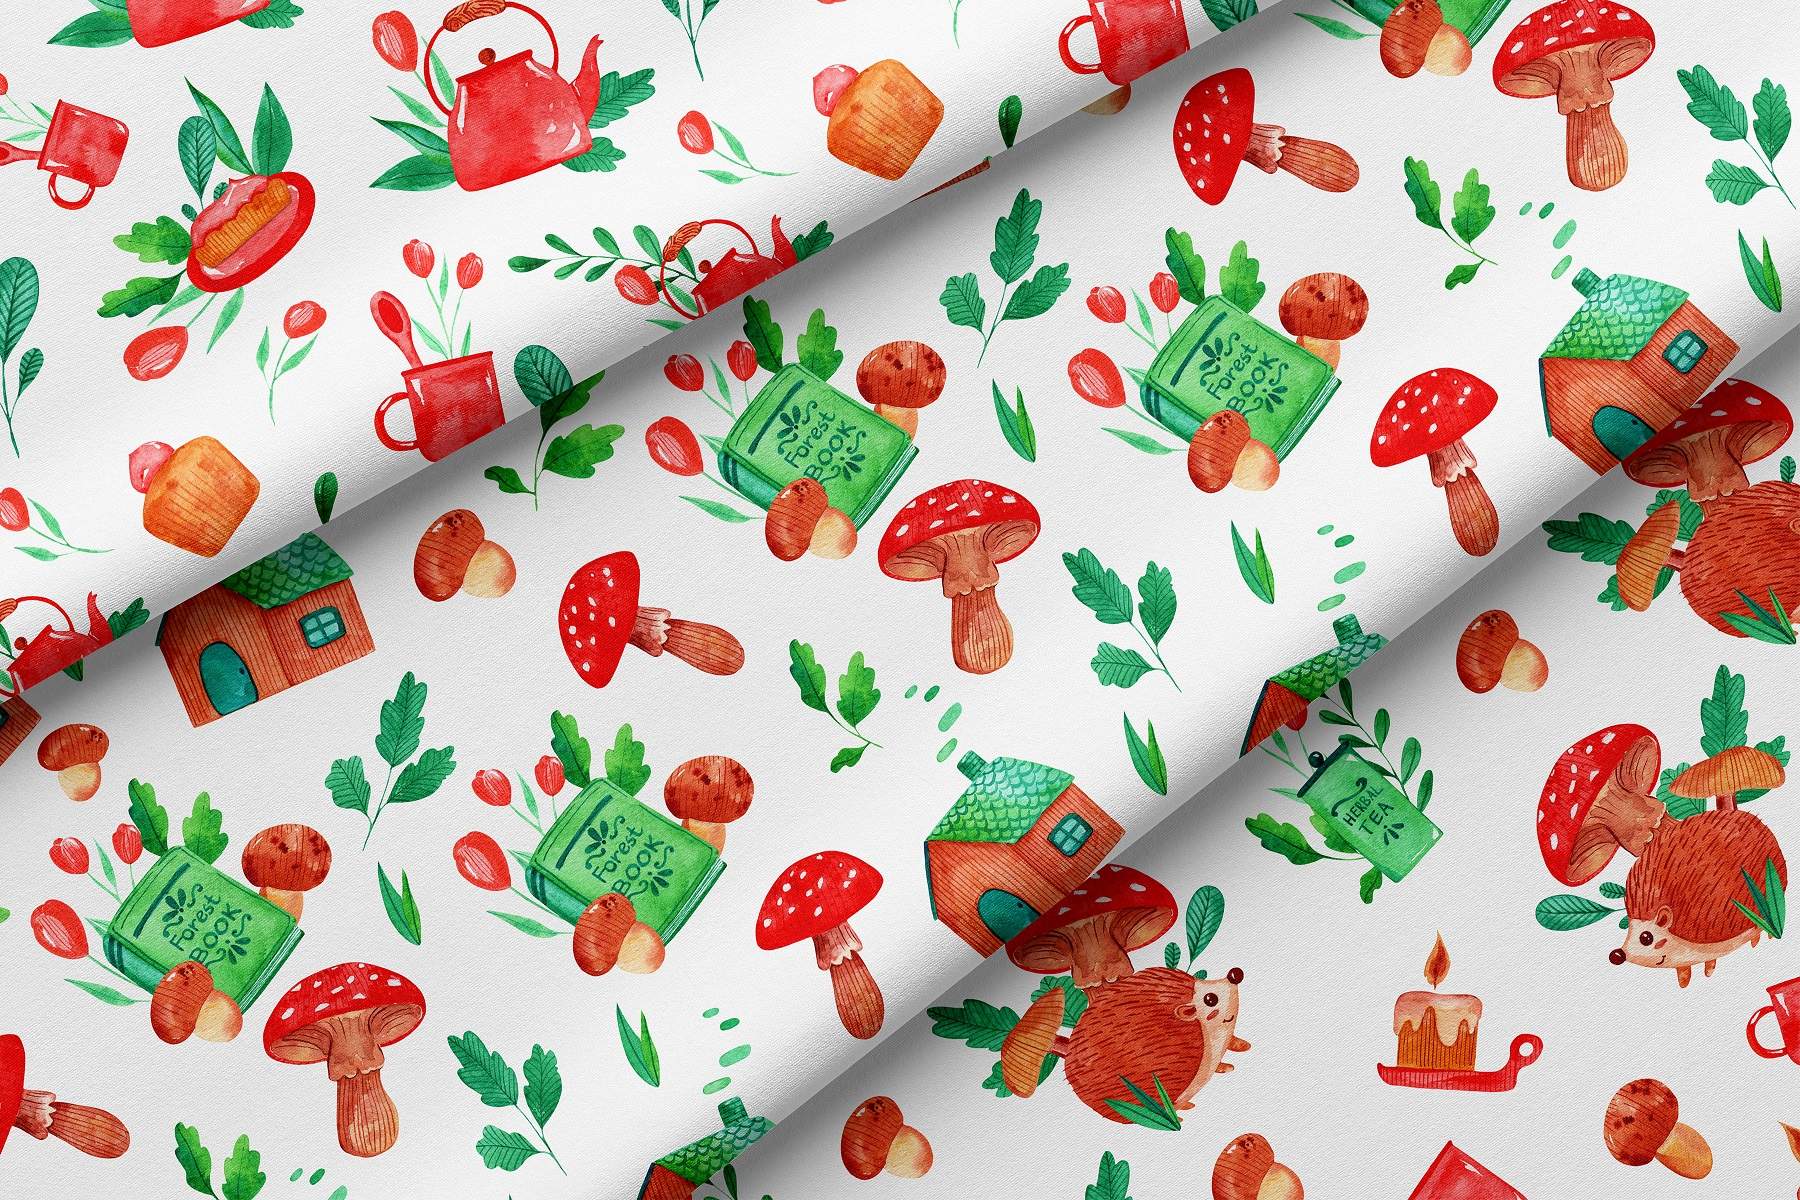 White background with a pattern of red and green objects.